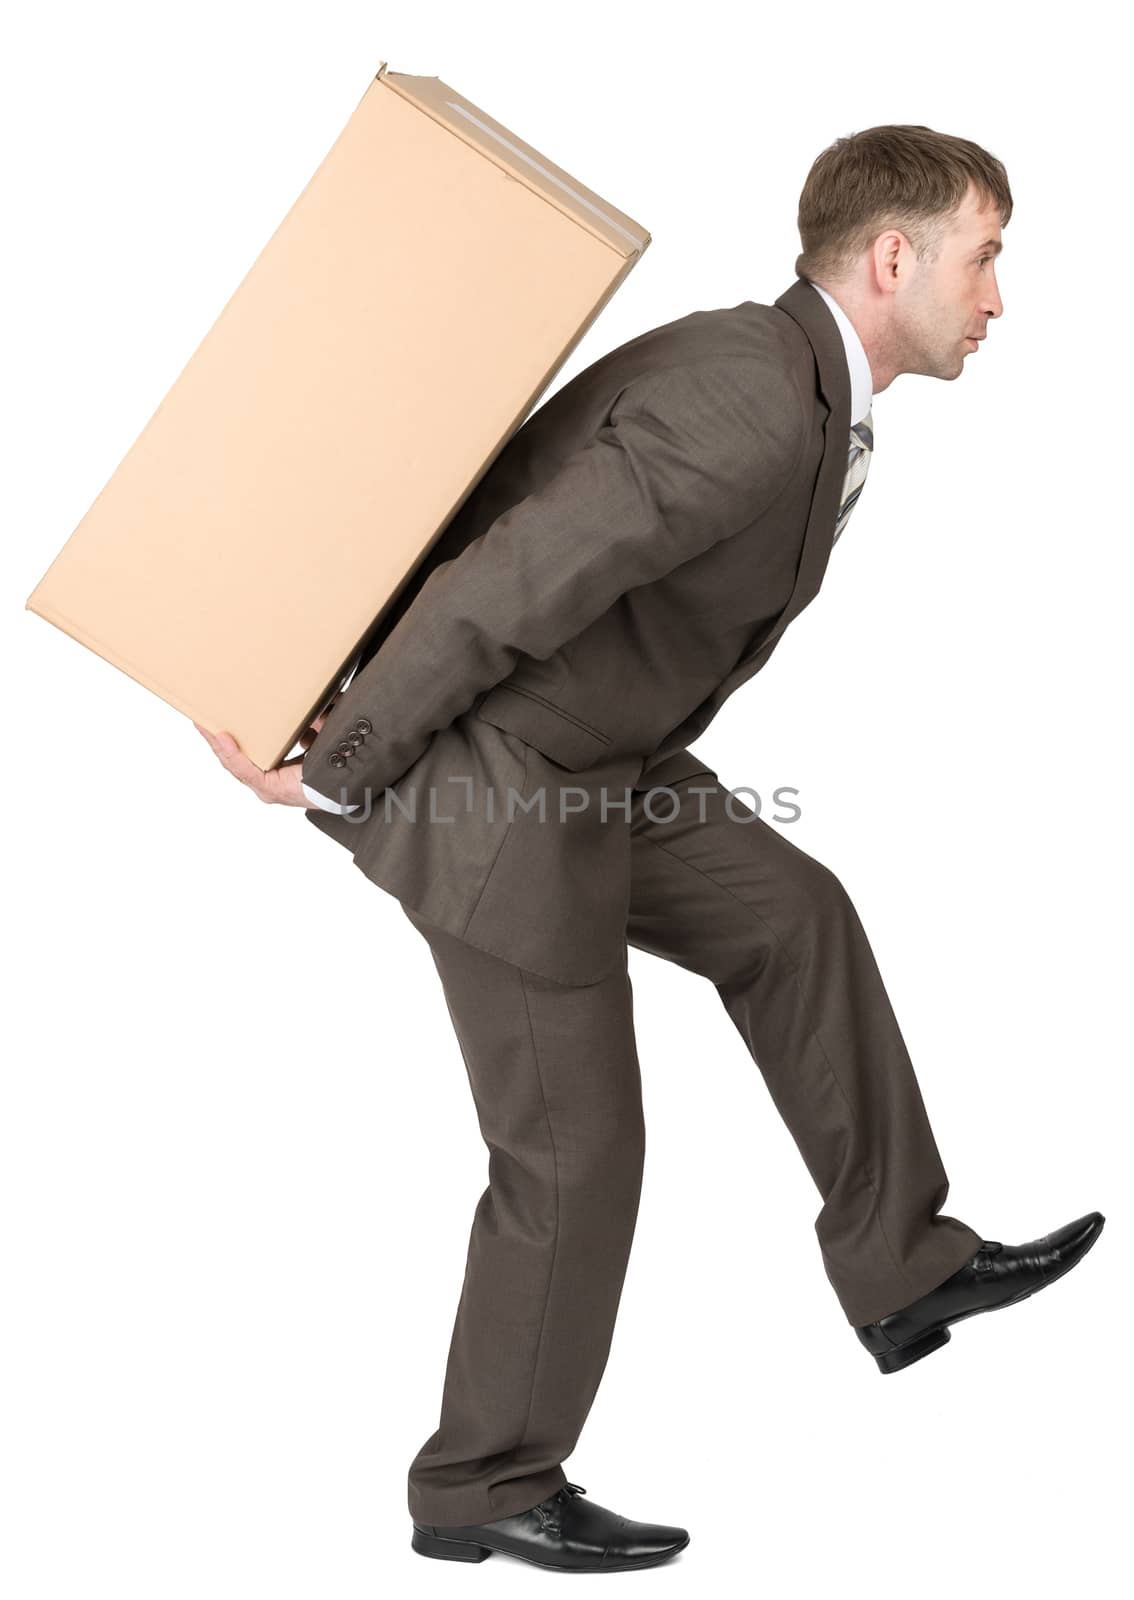 Businessman holding packages on back, looking forward. Isolated on white background